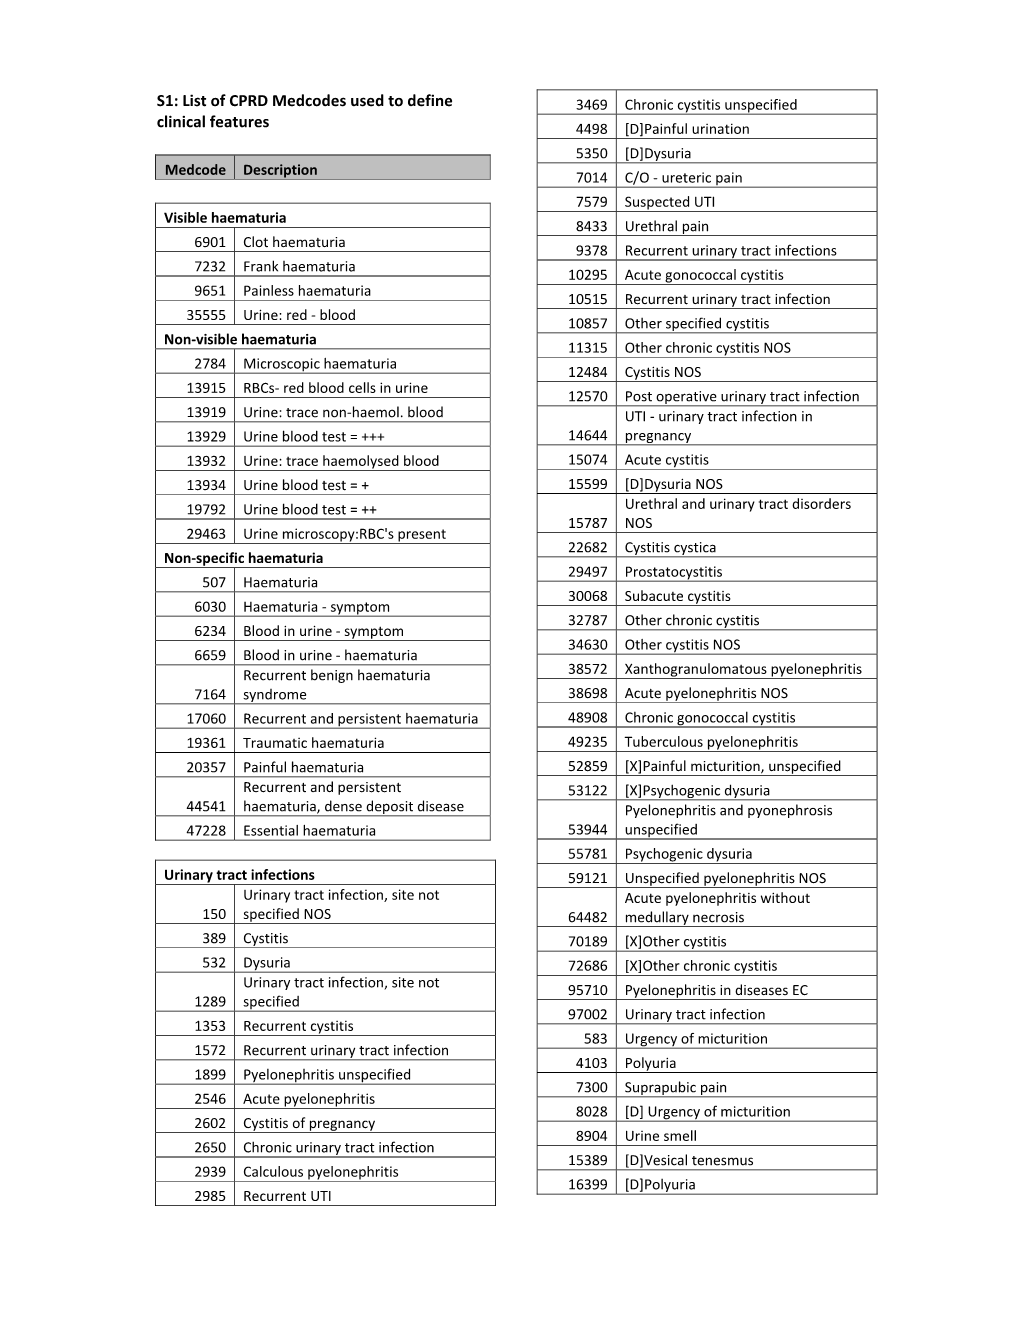 List of CPRD Medcodes Used to Define Clinical Features